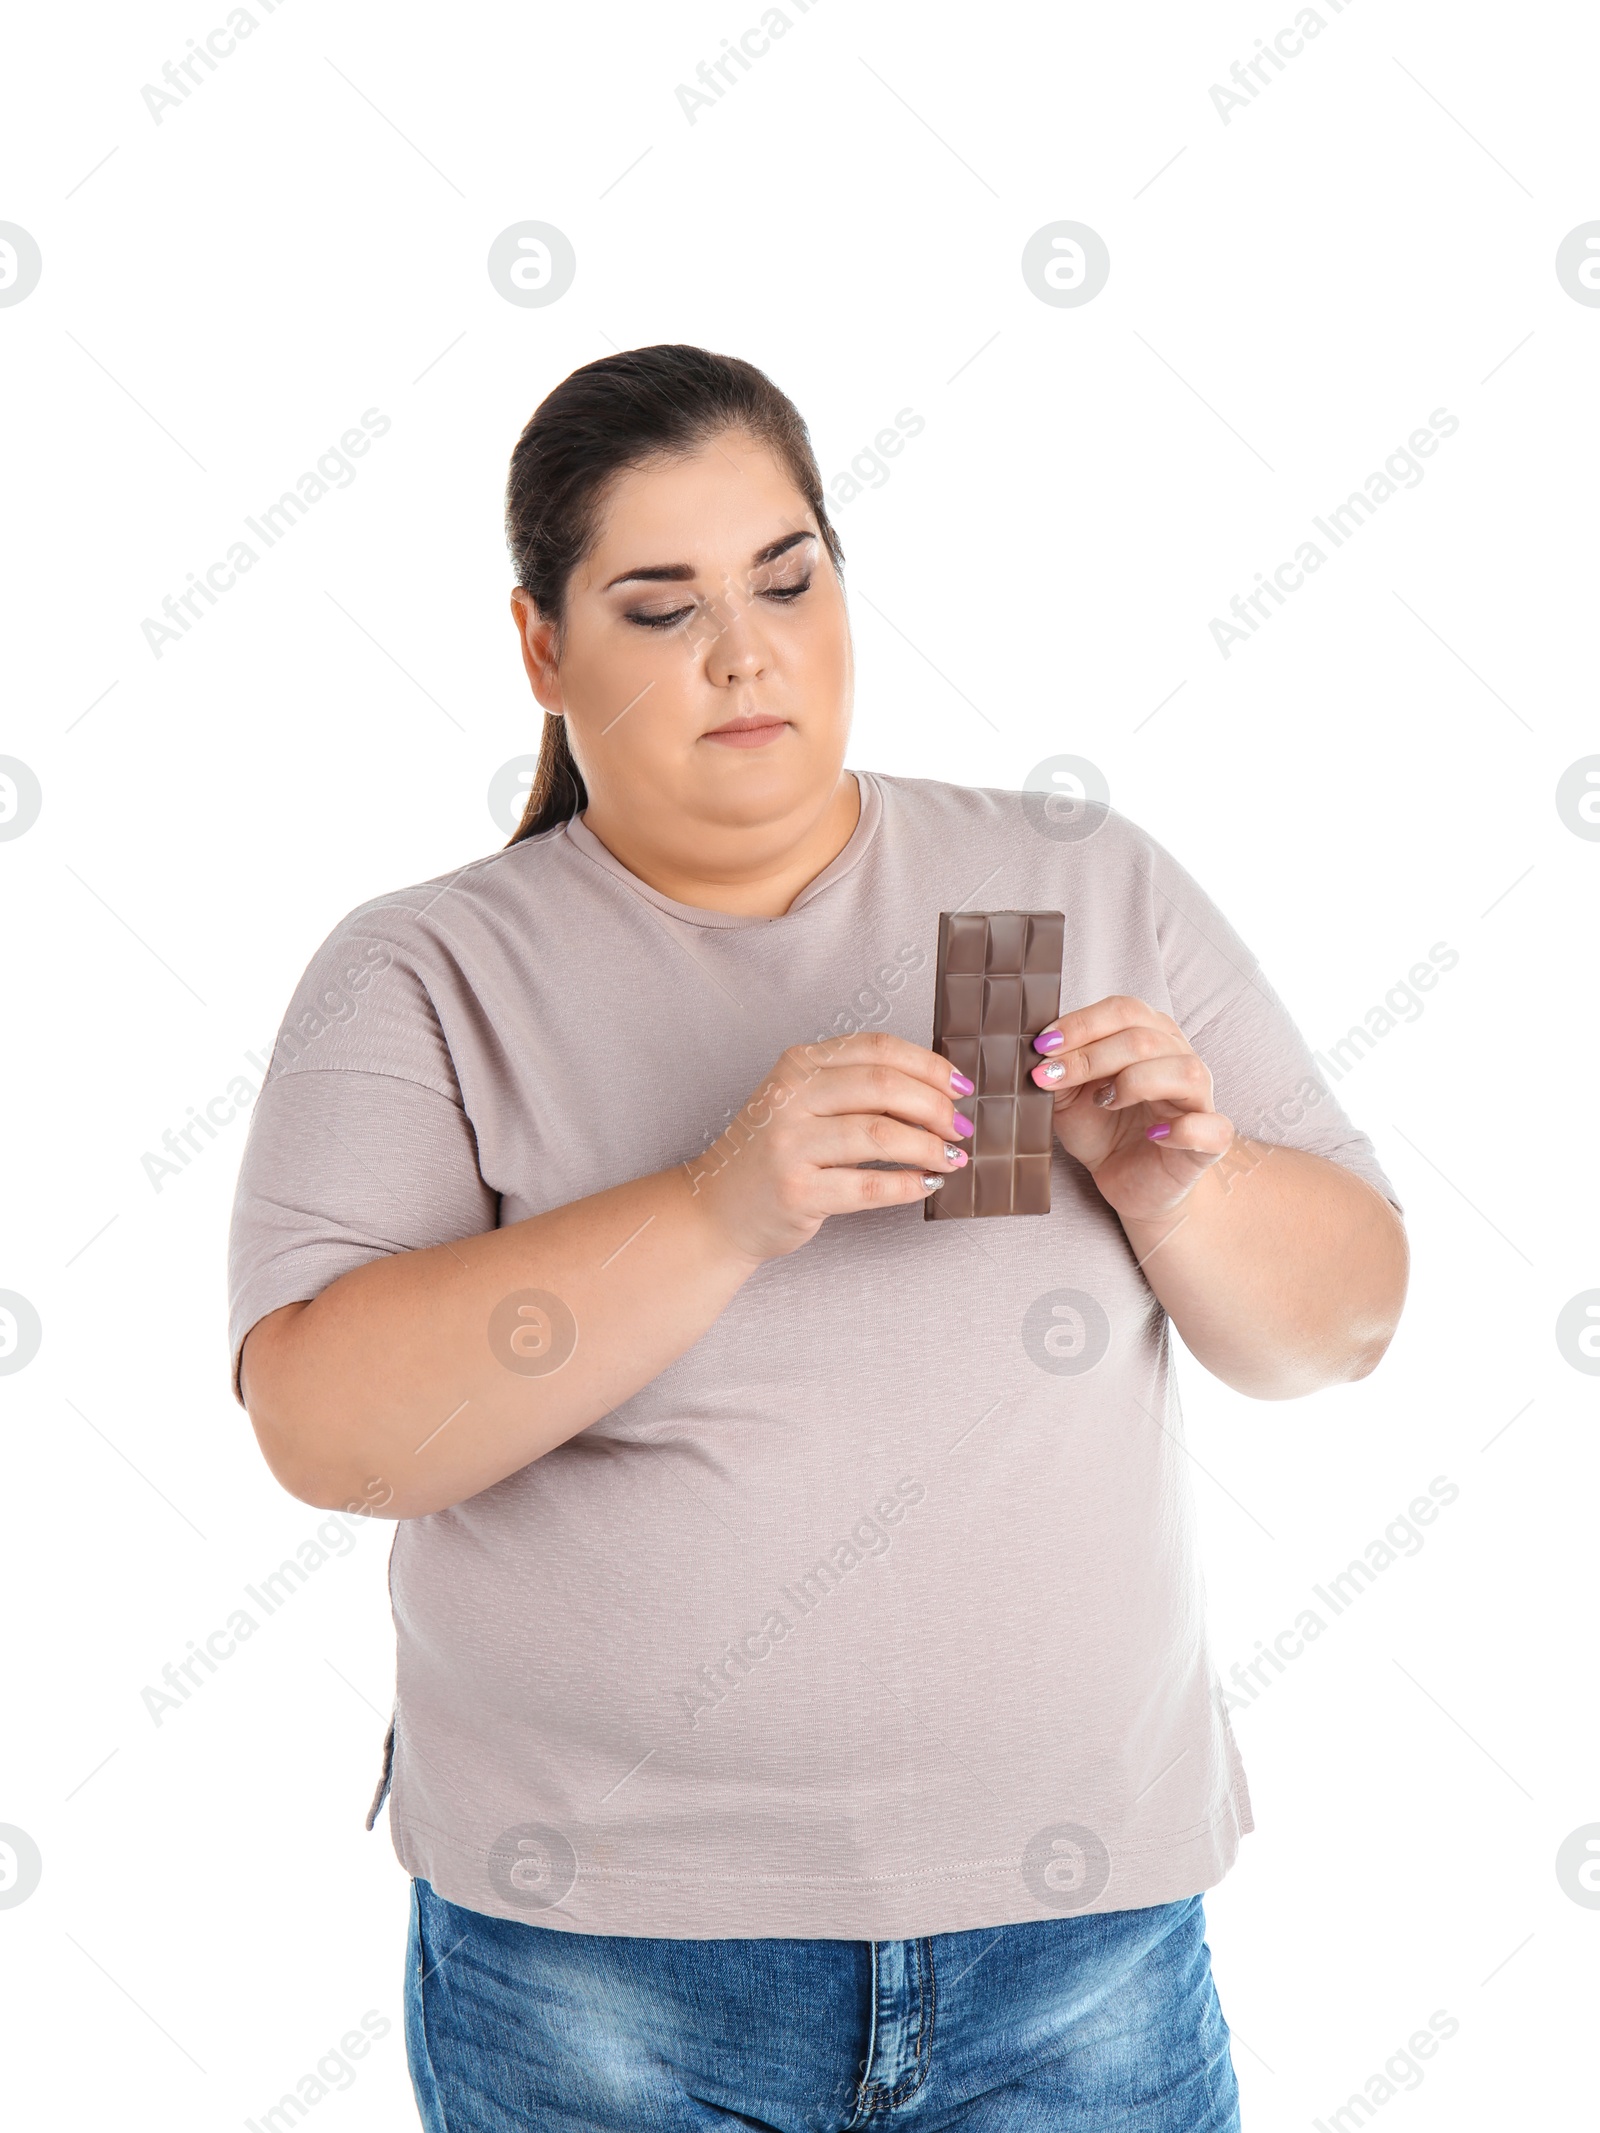 Photo of Overweight woman with chocolate bar on white background